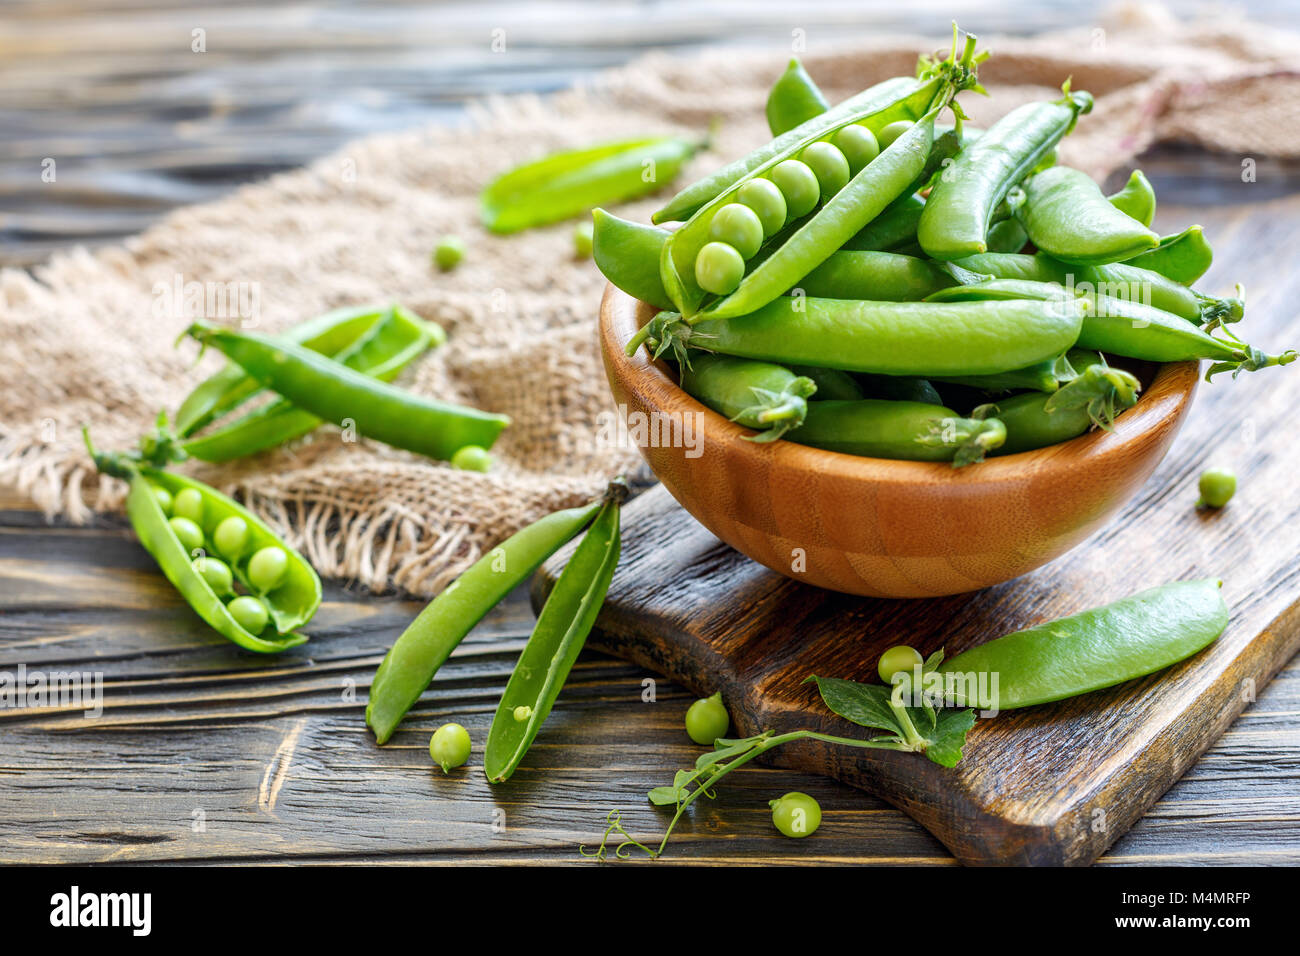 Wooden bowl with sweet pea pods. Stock Photo